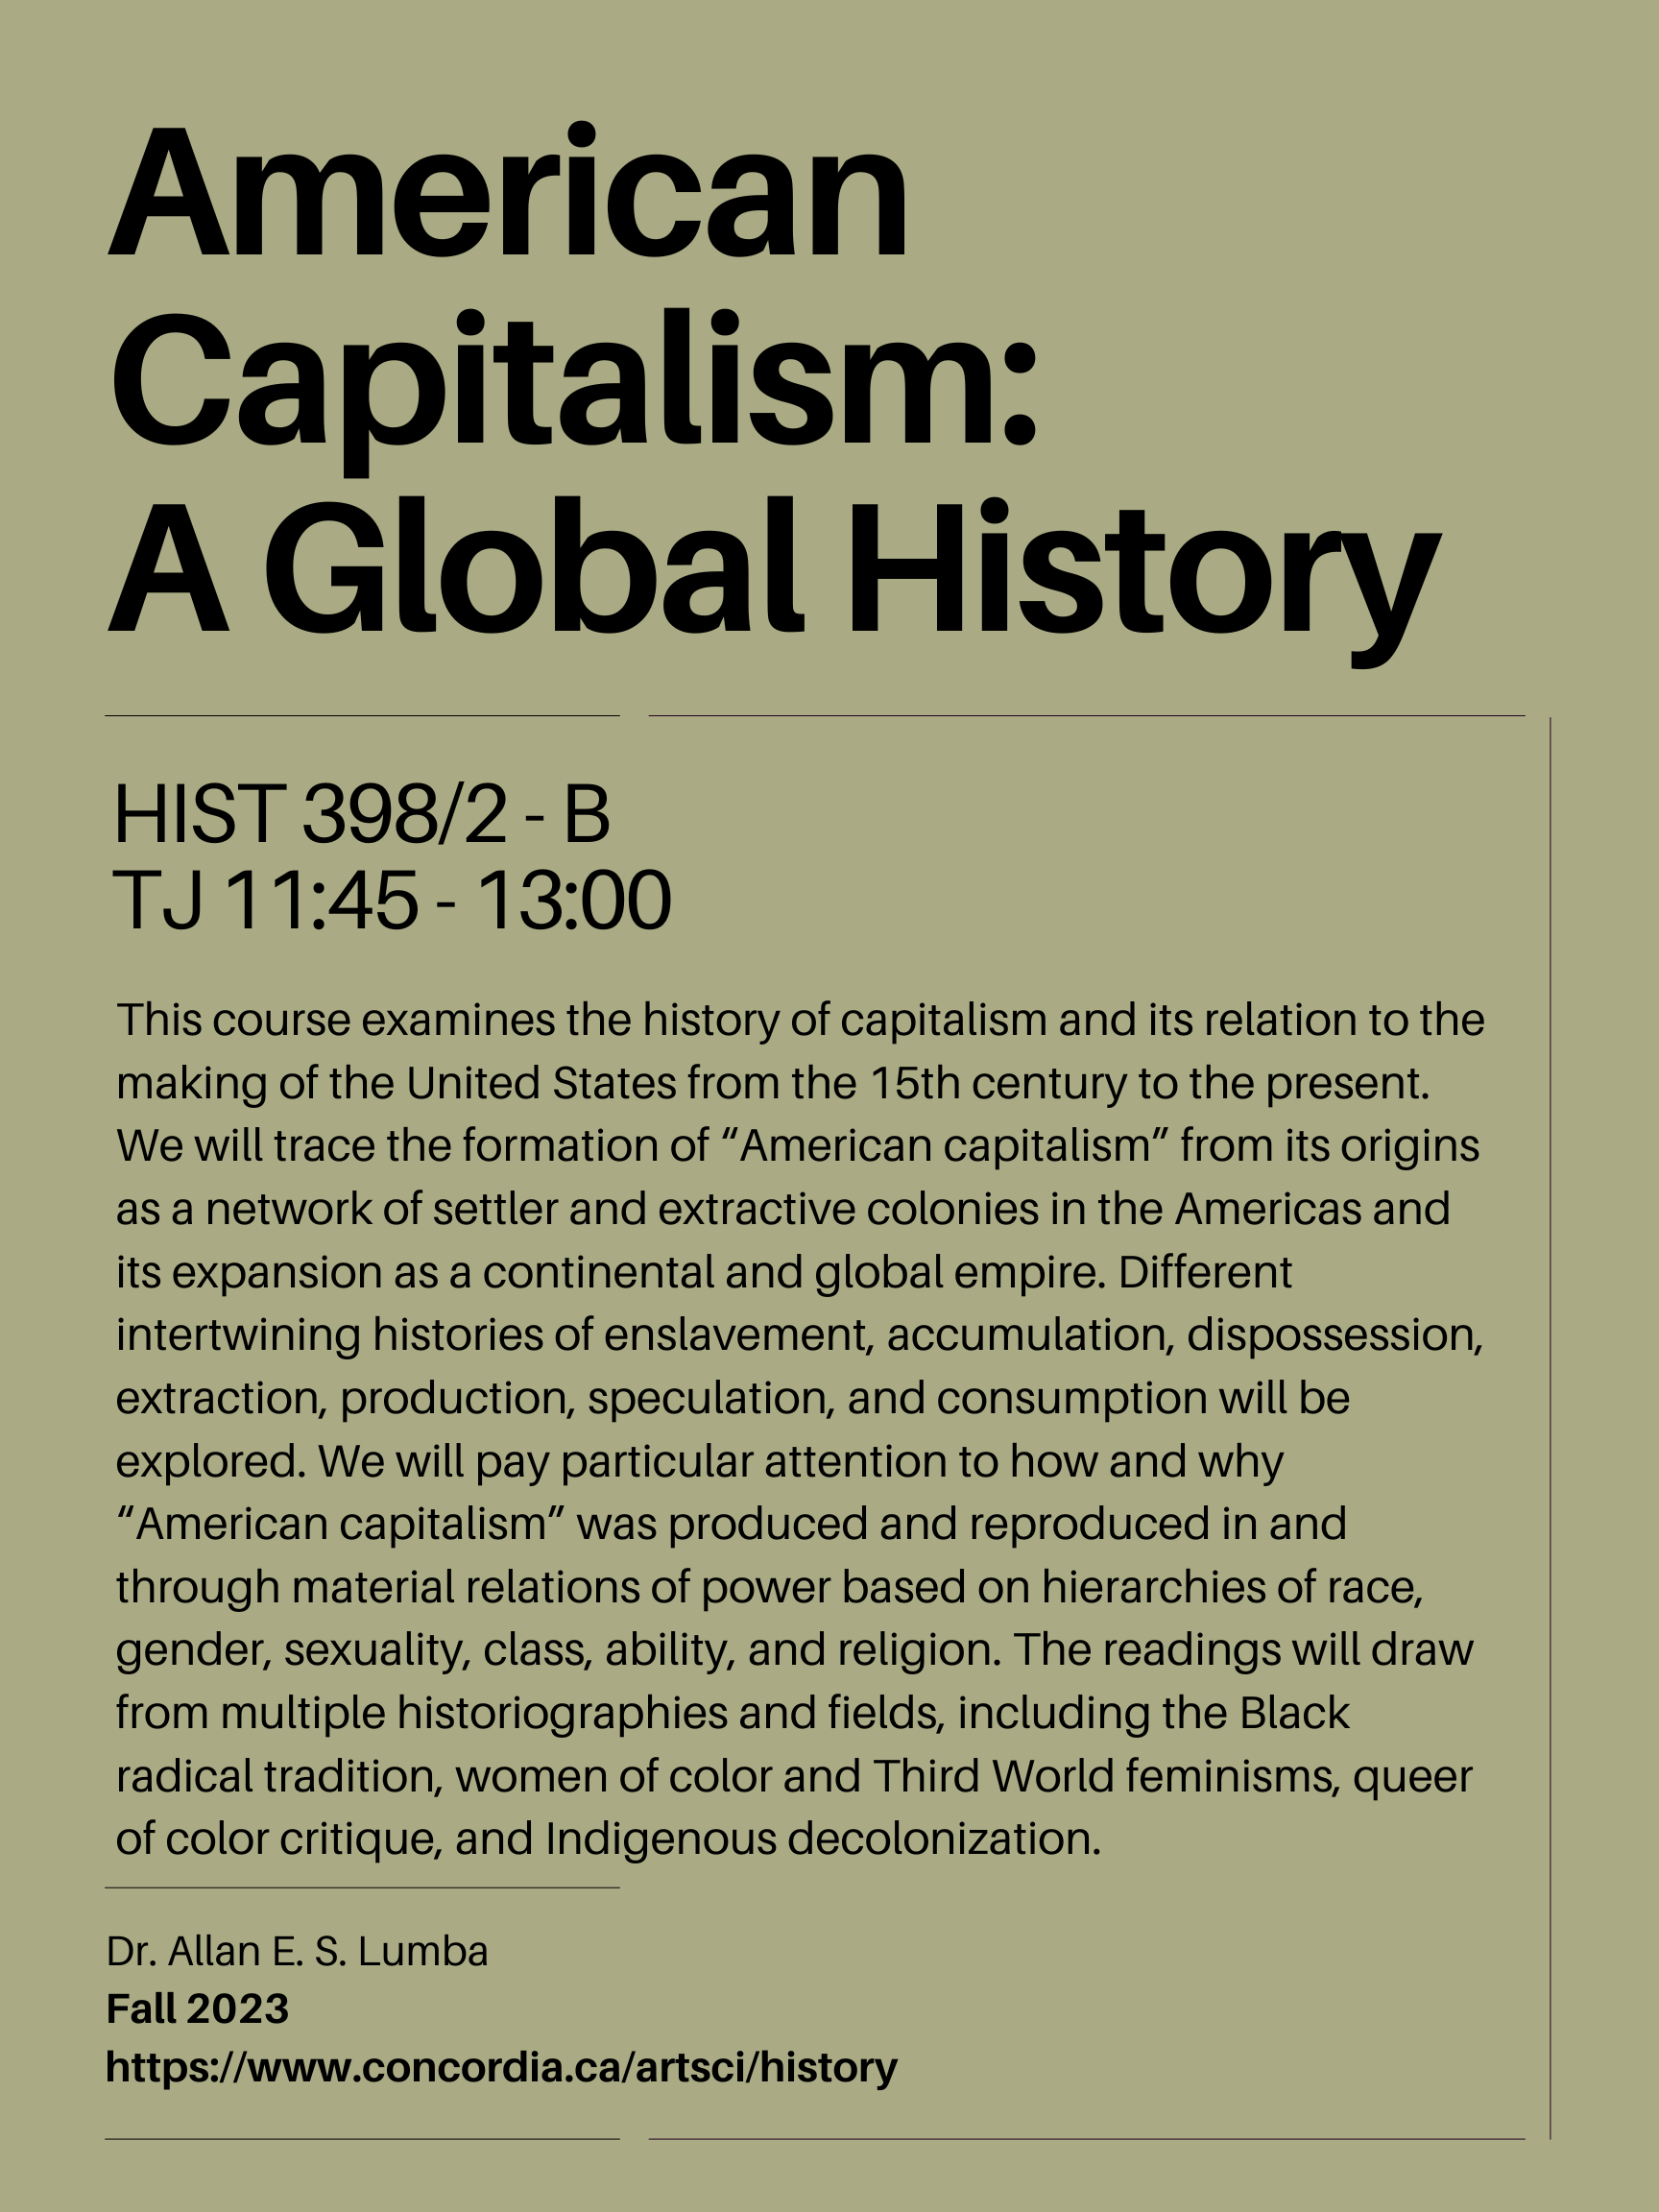 History of AMerican Capitalism (1).png